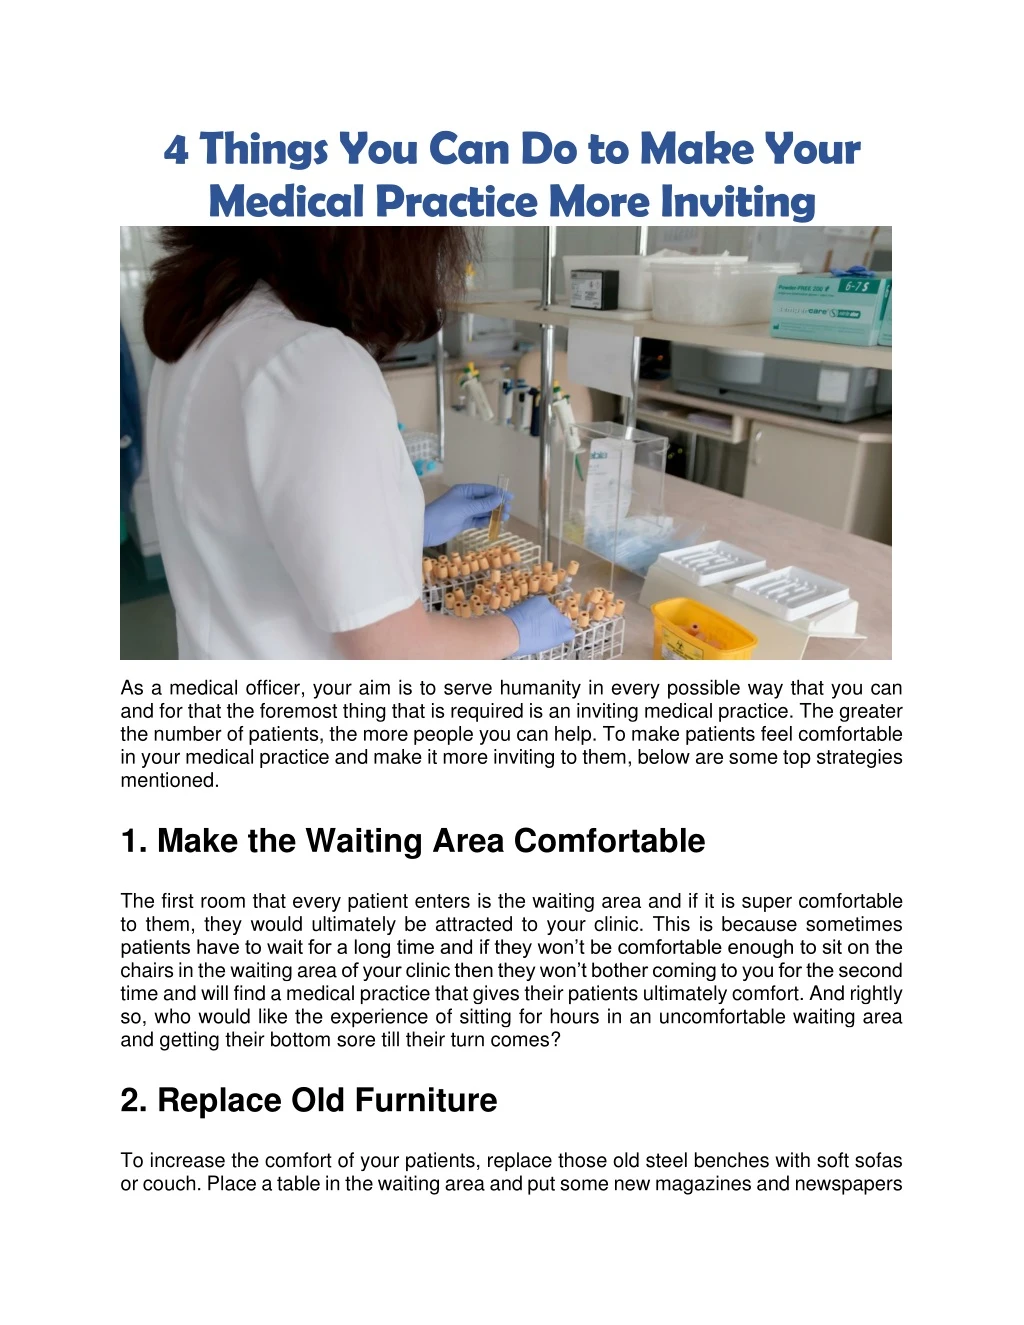 4 things you can do to make your medical practice